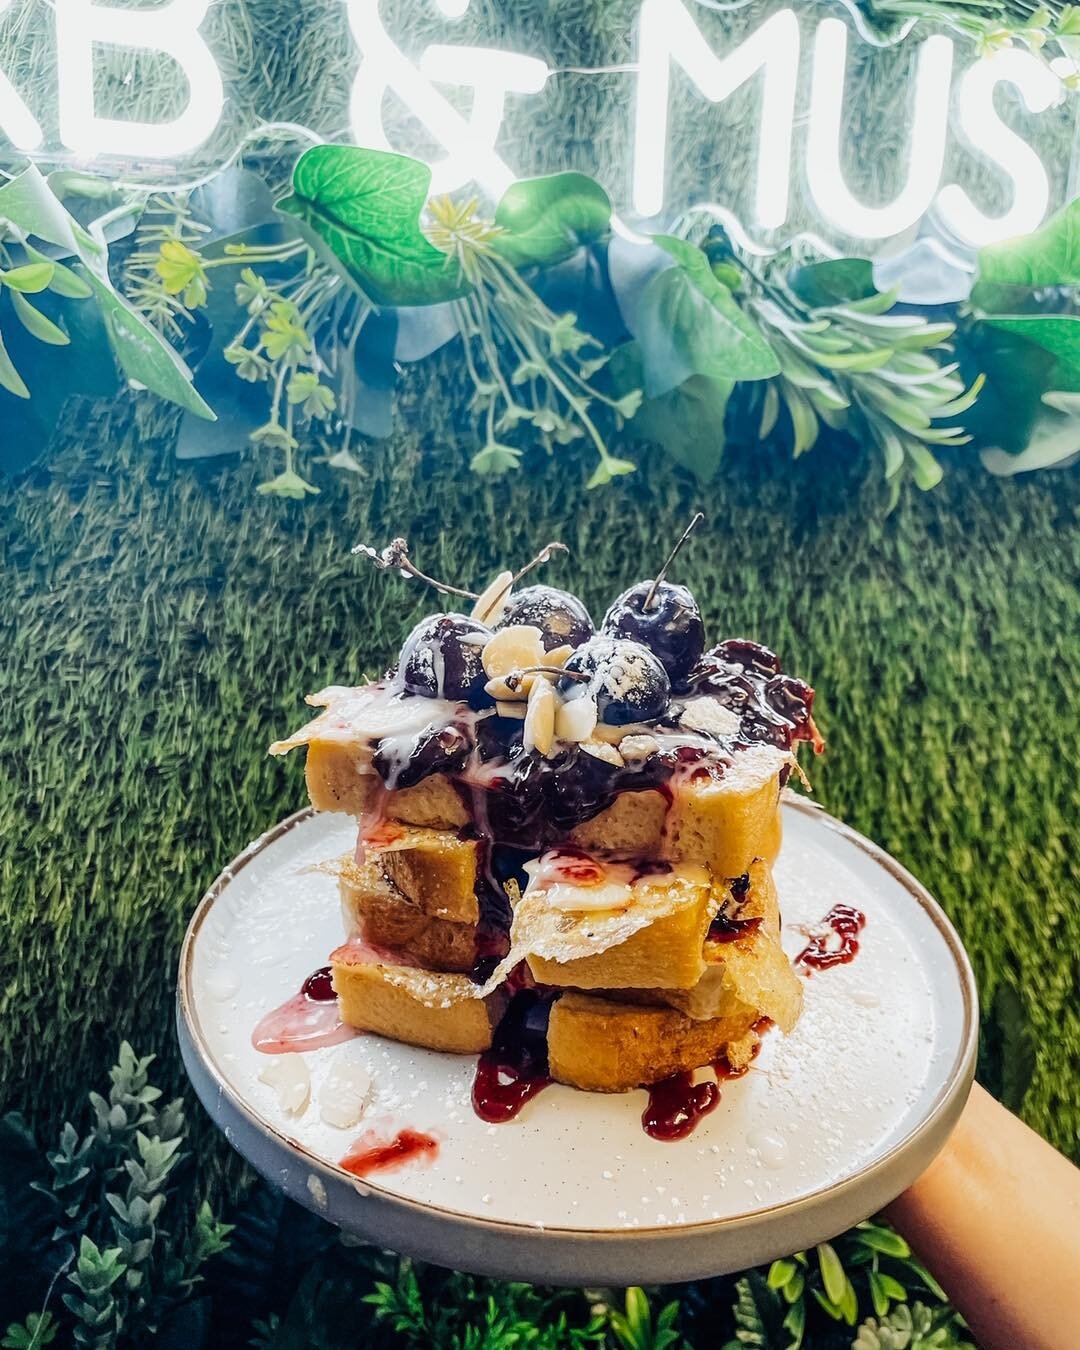 Pretty please with a cherry on top&hellip;

Available from today, our latest special: Cherry bakewell french toast